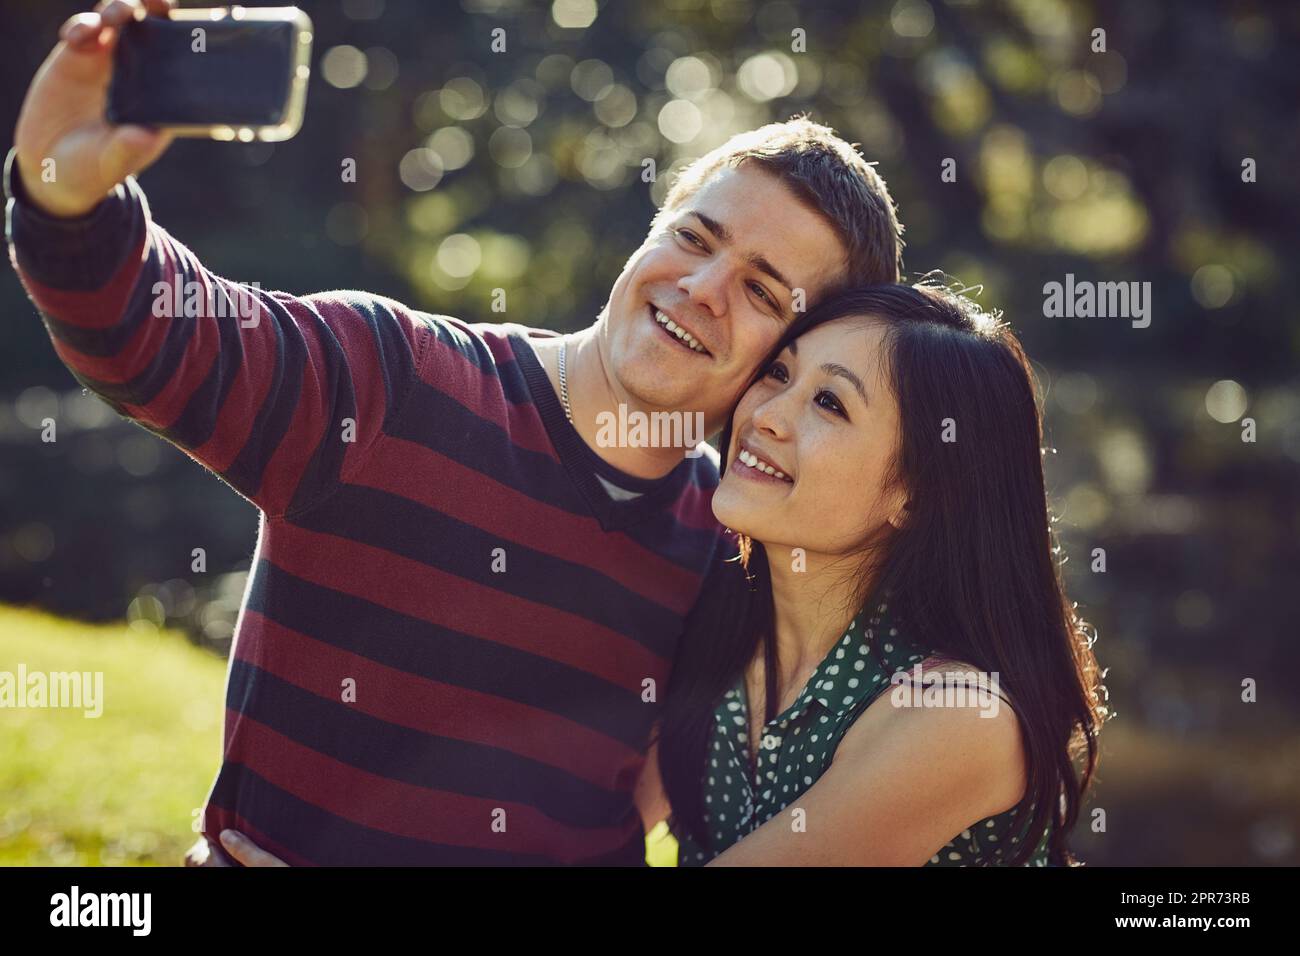 Where theres romance, theres a selfie. Shot of a happy young couple taking a selfie together in the park. Stock Photo